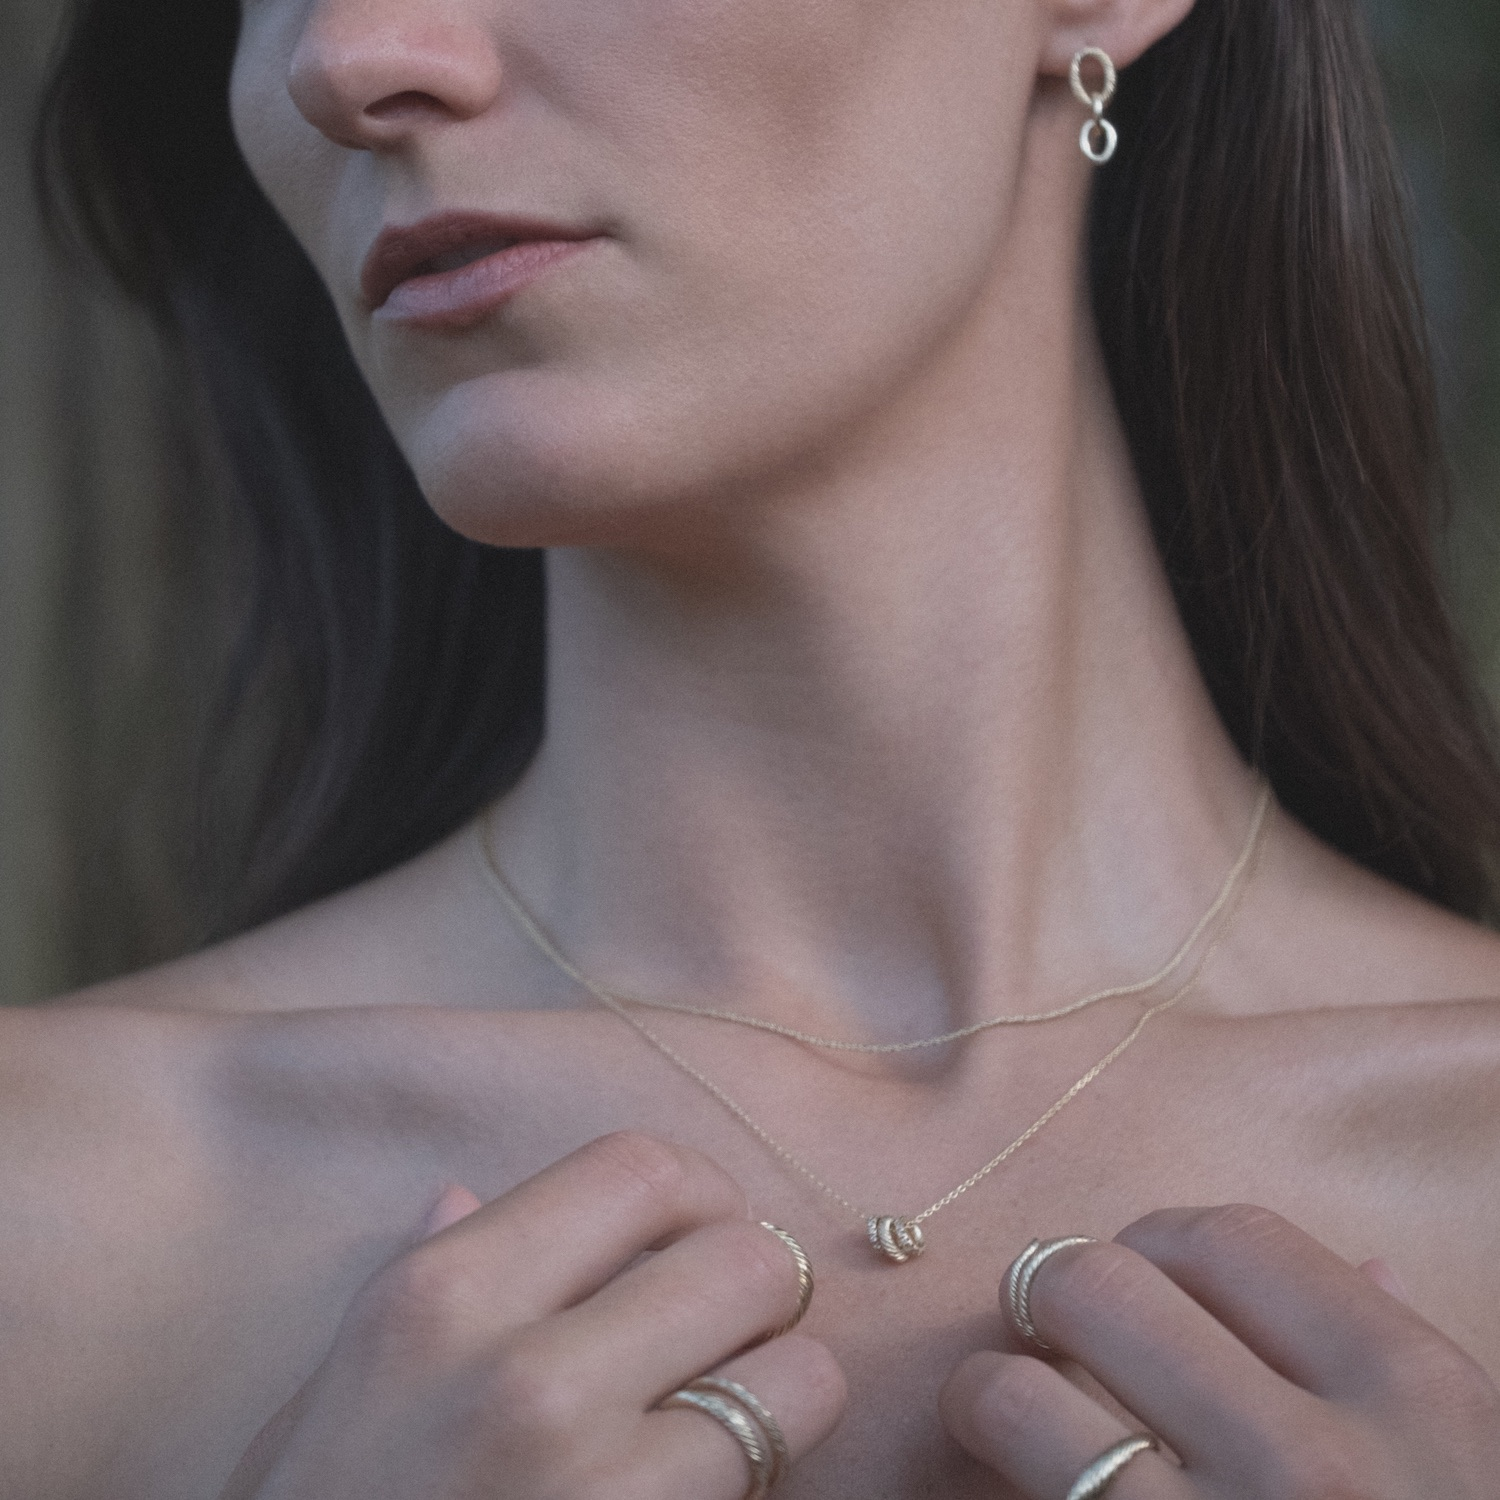 Model wearing Aiden Jae's textured yellow gold earrings, rings, and necklaces.